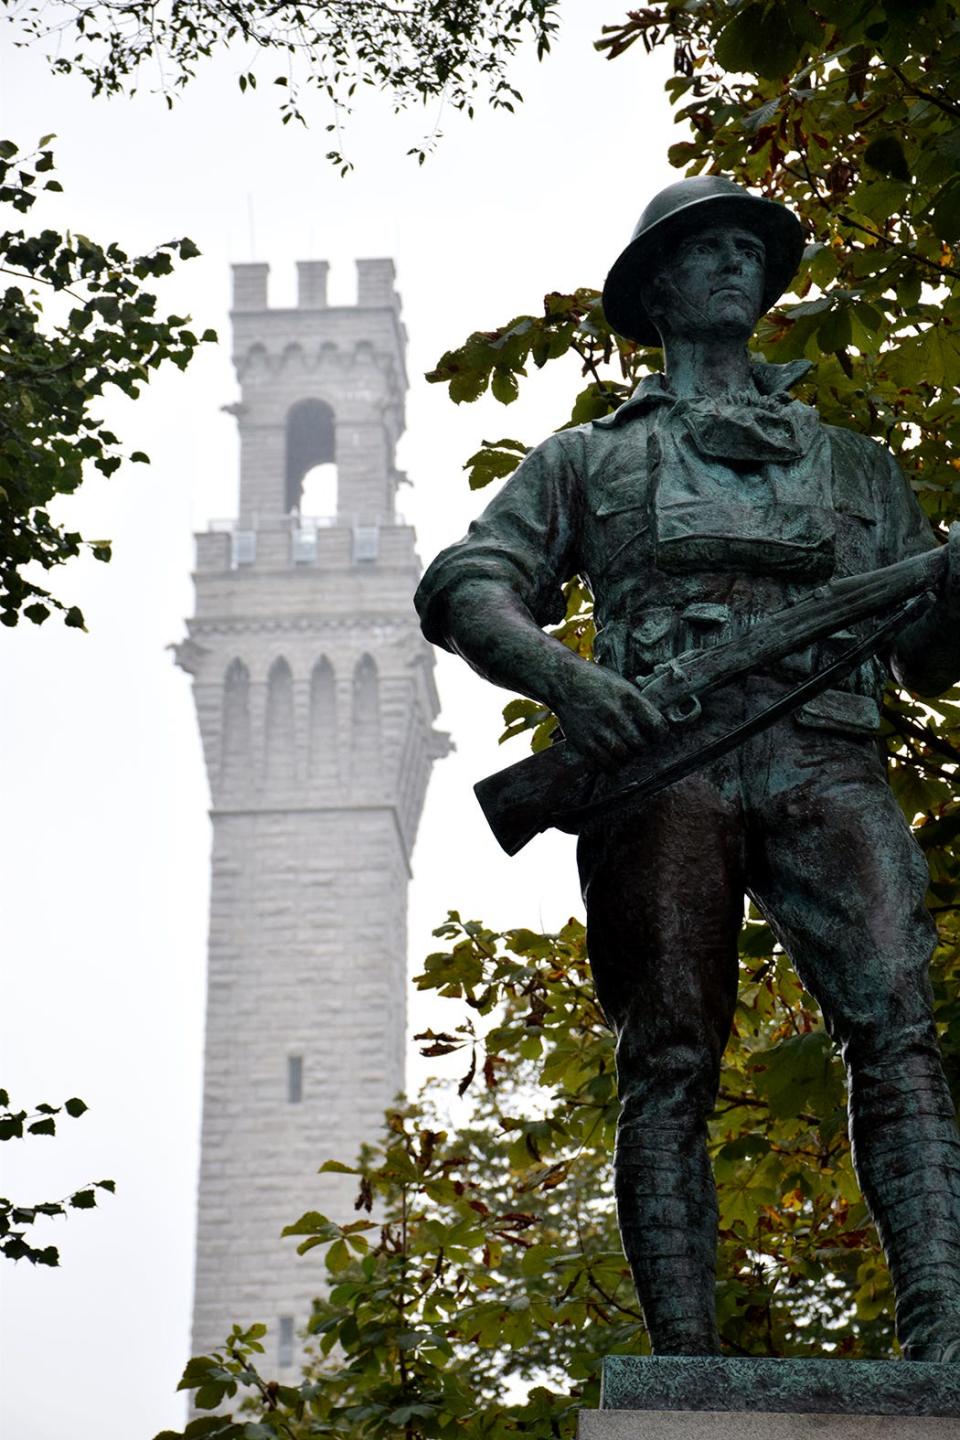 The Pilgrim Monument, 252 feet high, towers above a World War I statue in Provincetown, Massachusetts. The monument was dedicated in 1910 to recognize the 1620 landing of the Pilgrims nearby.